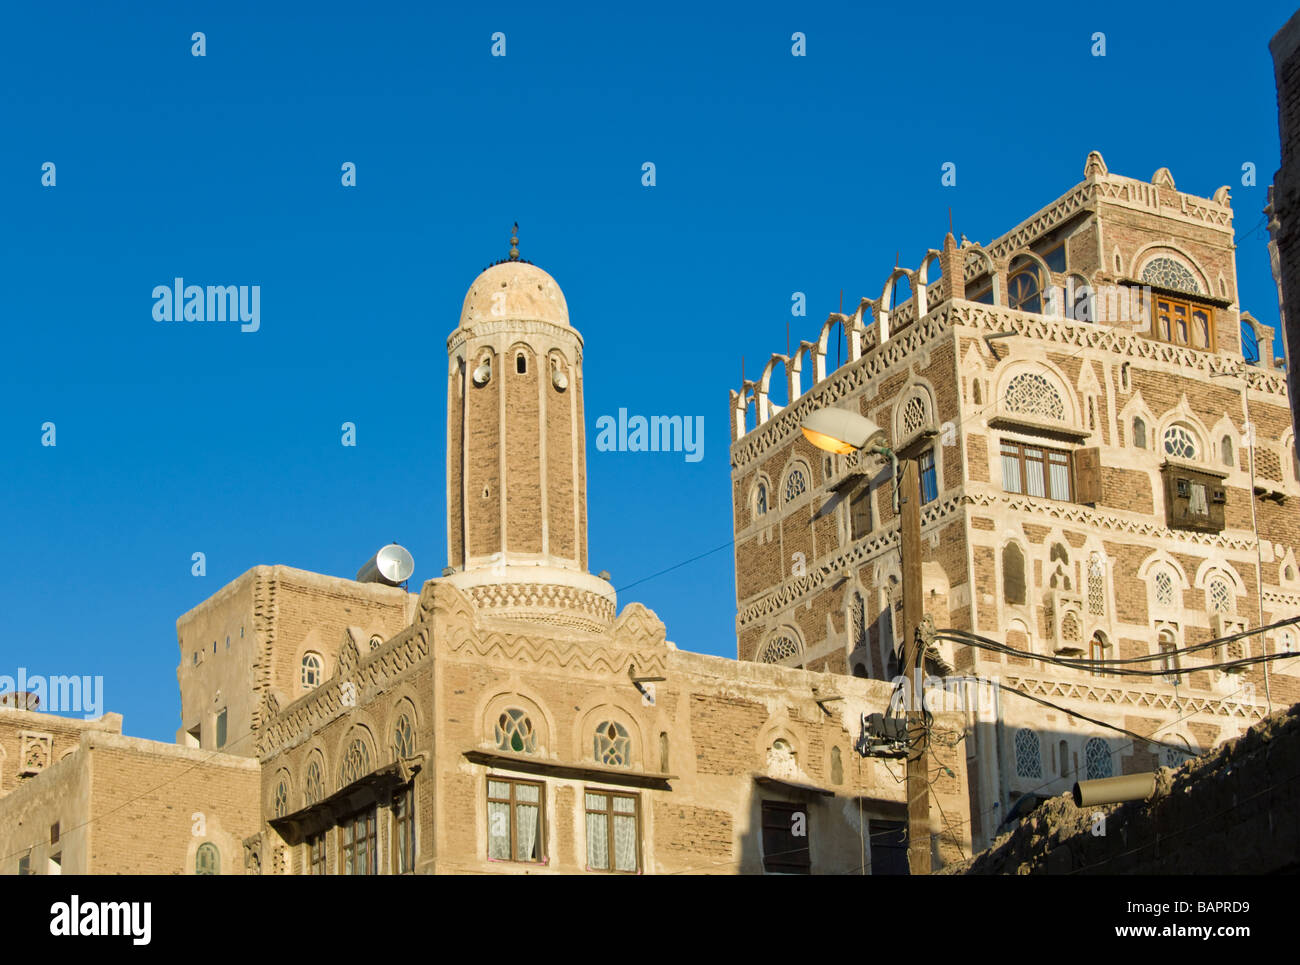 Traditional building with mosque in the old town district of Sana'a Yemen Stock Photo